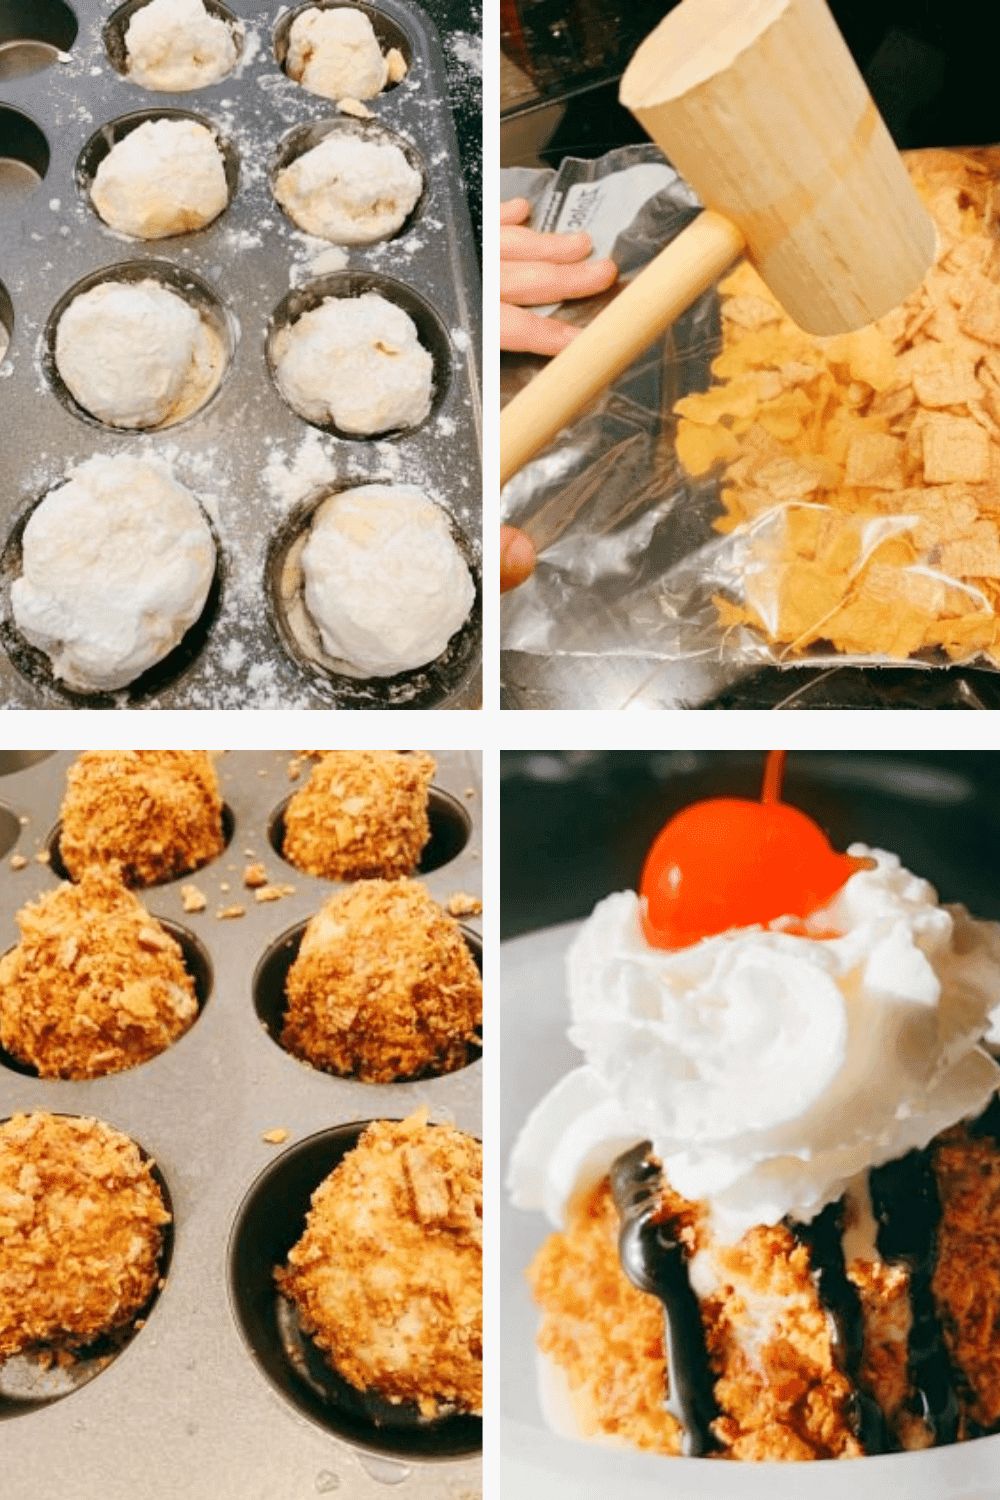 Making Crunchy Corn Flake Coating for Fried Ice Cream Recipe (how to make air fried ice cream step by step)